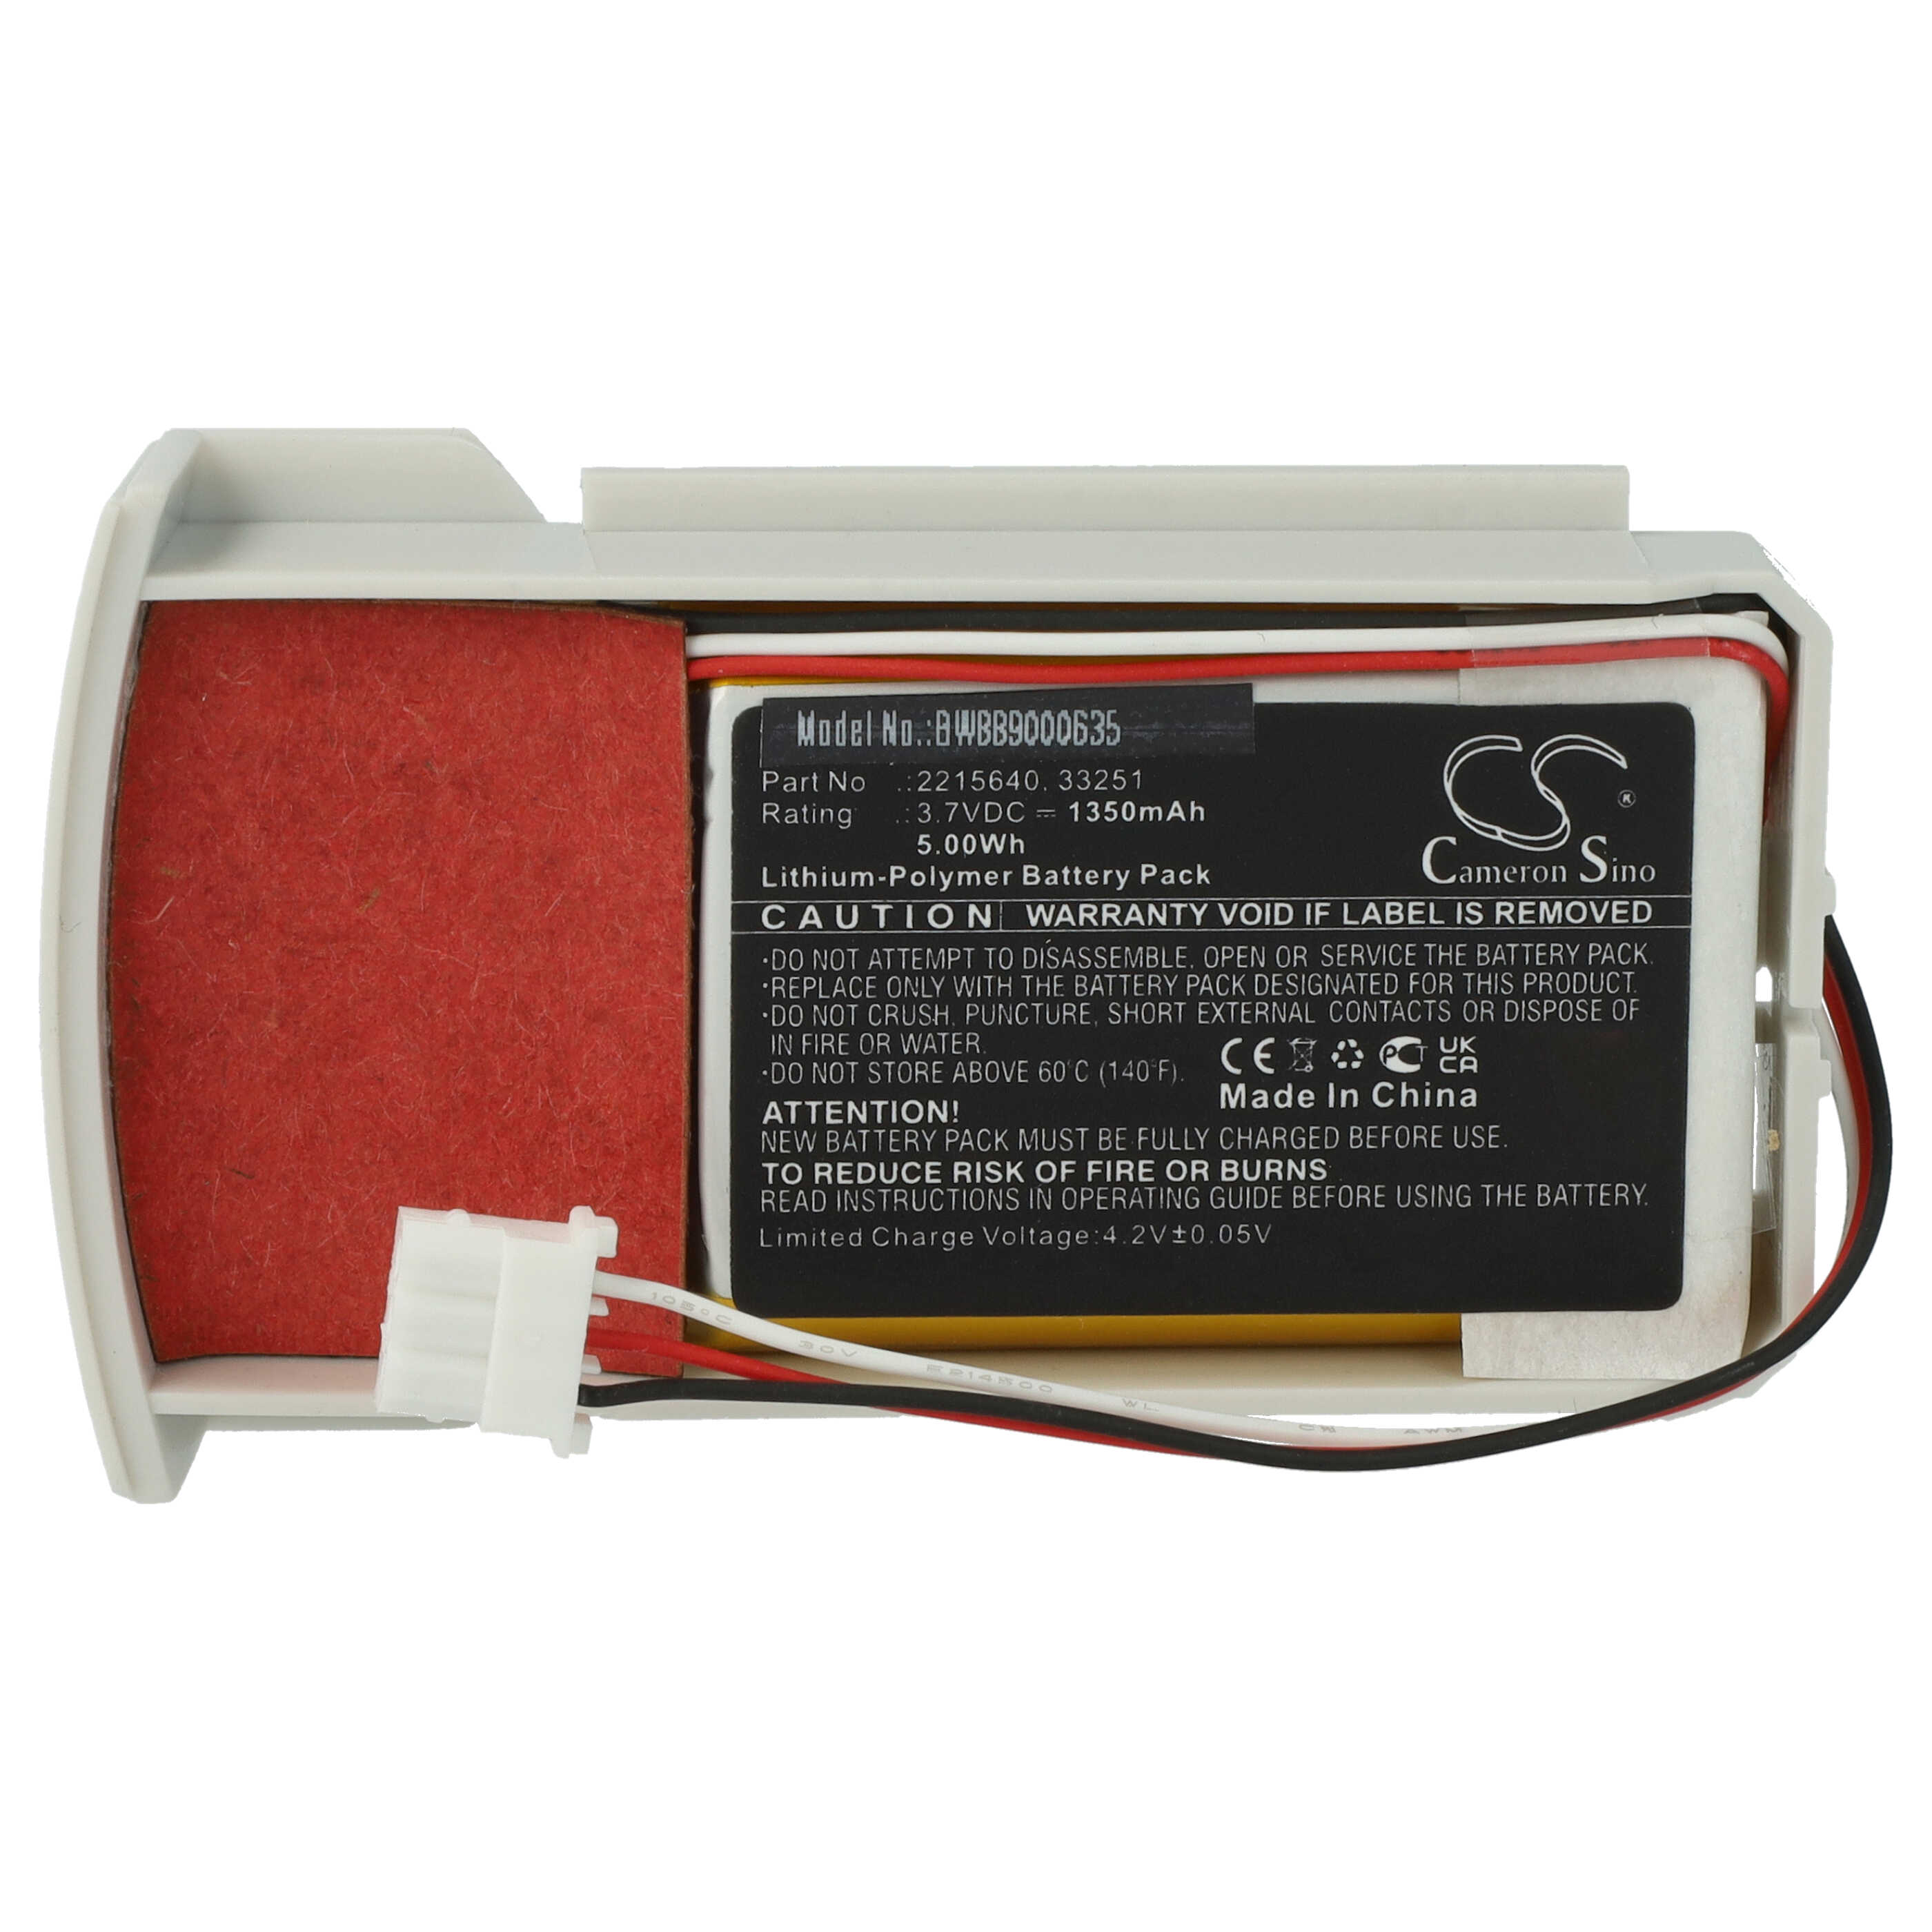 Medical Equipment Battery Replacement for Thermo Scientific 33251, 2215640 - 1350mAh 3.7V Li-polymer